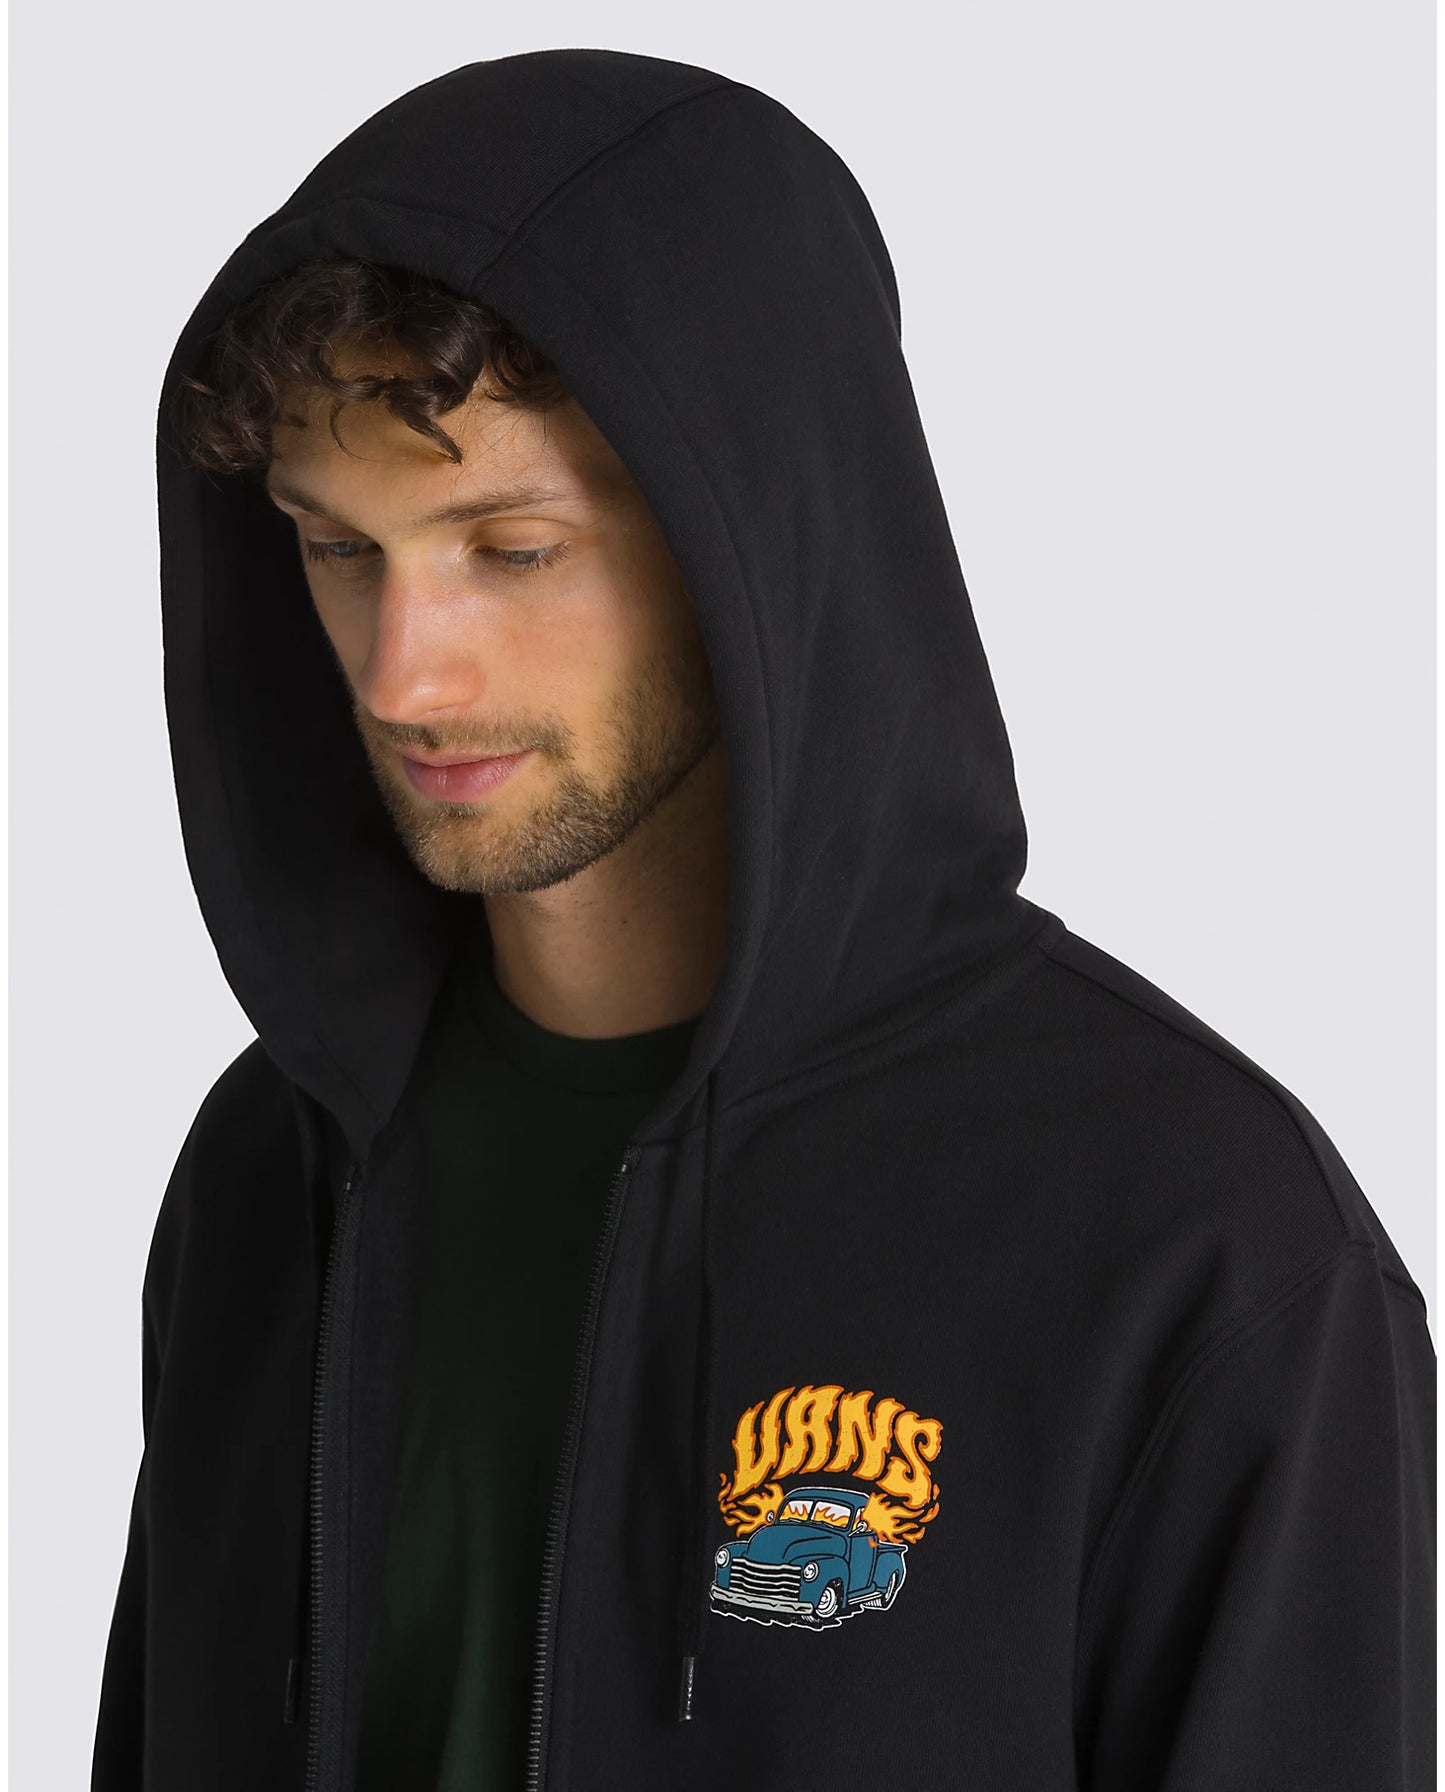 Hot Rod Full Zip Hoodie Blk(size options listed)